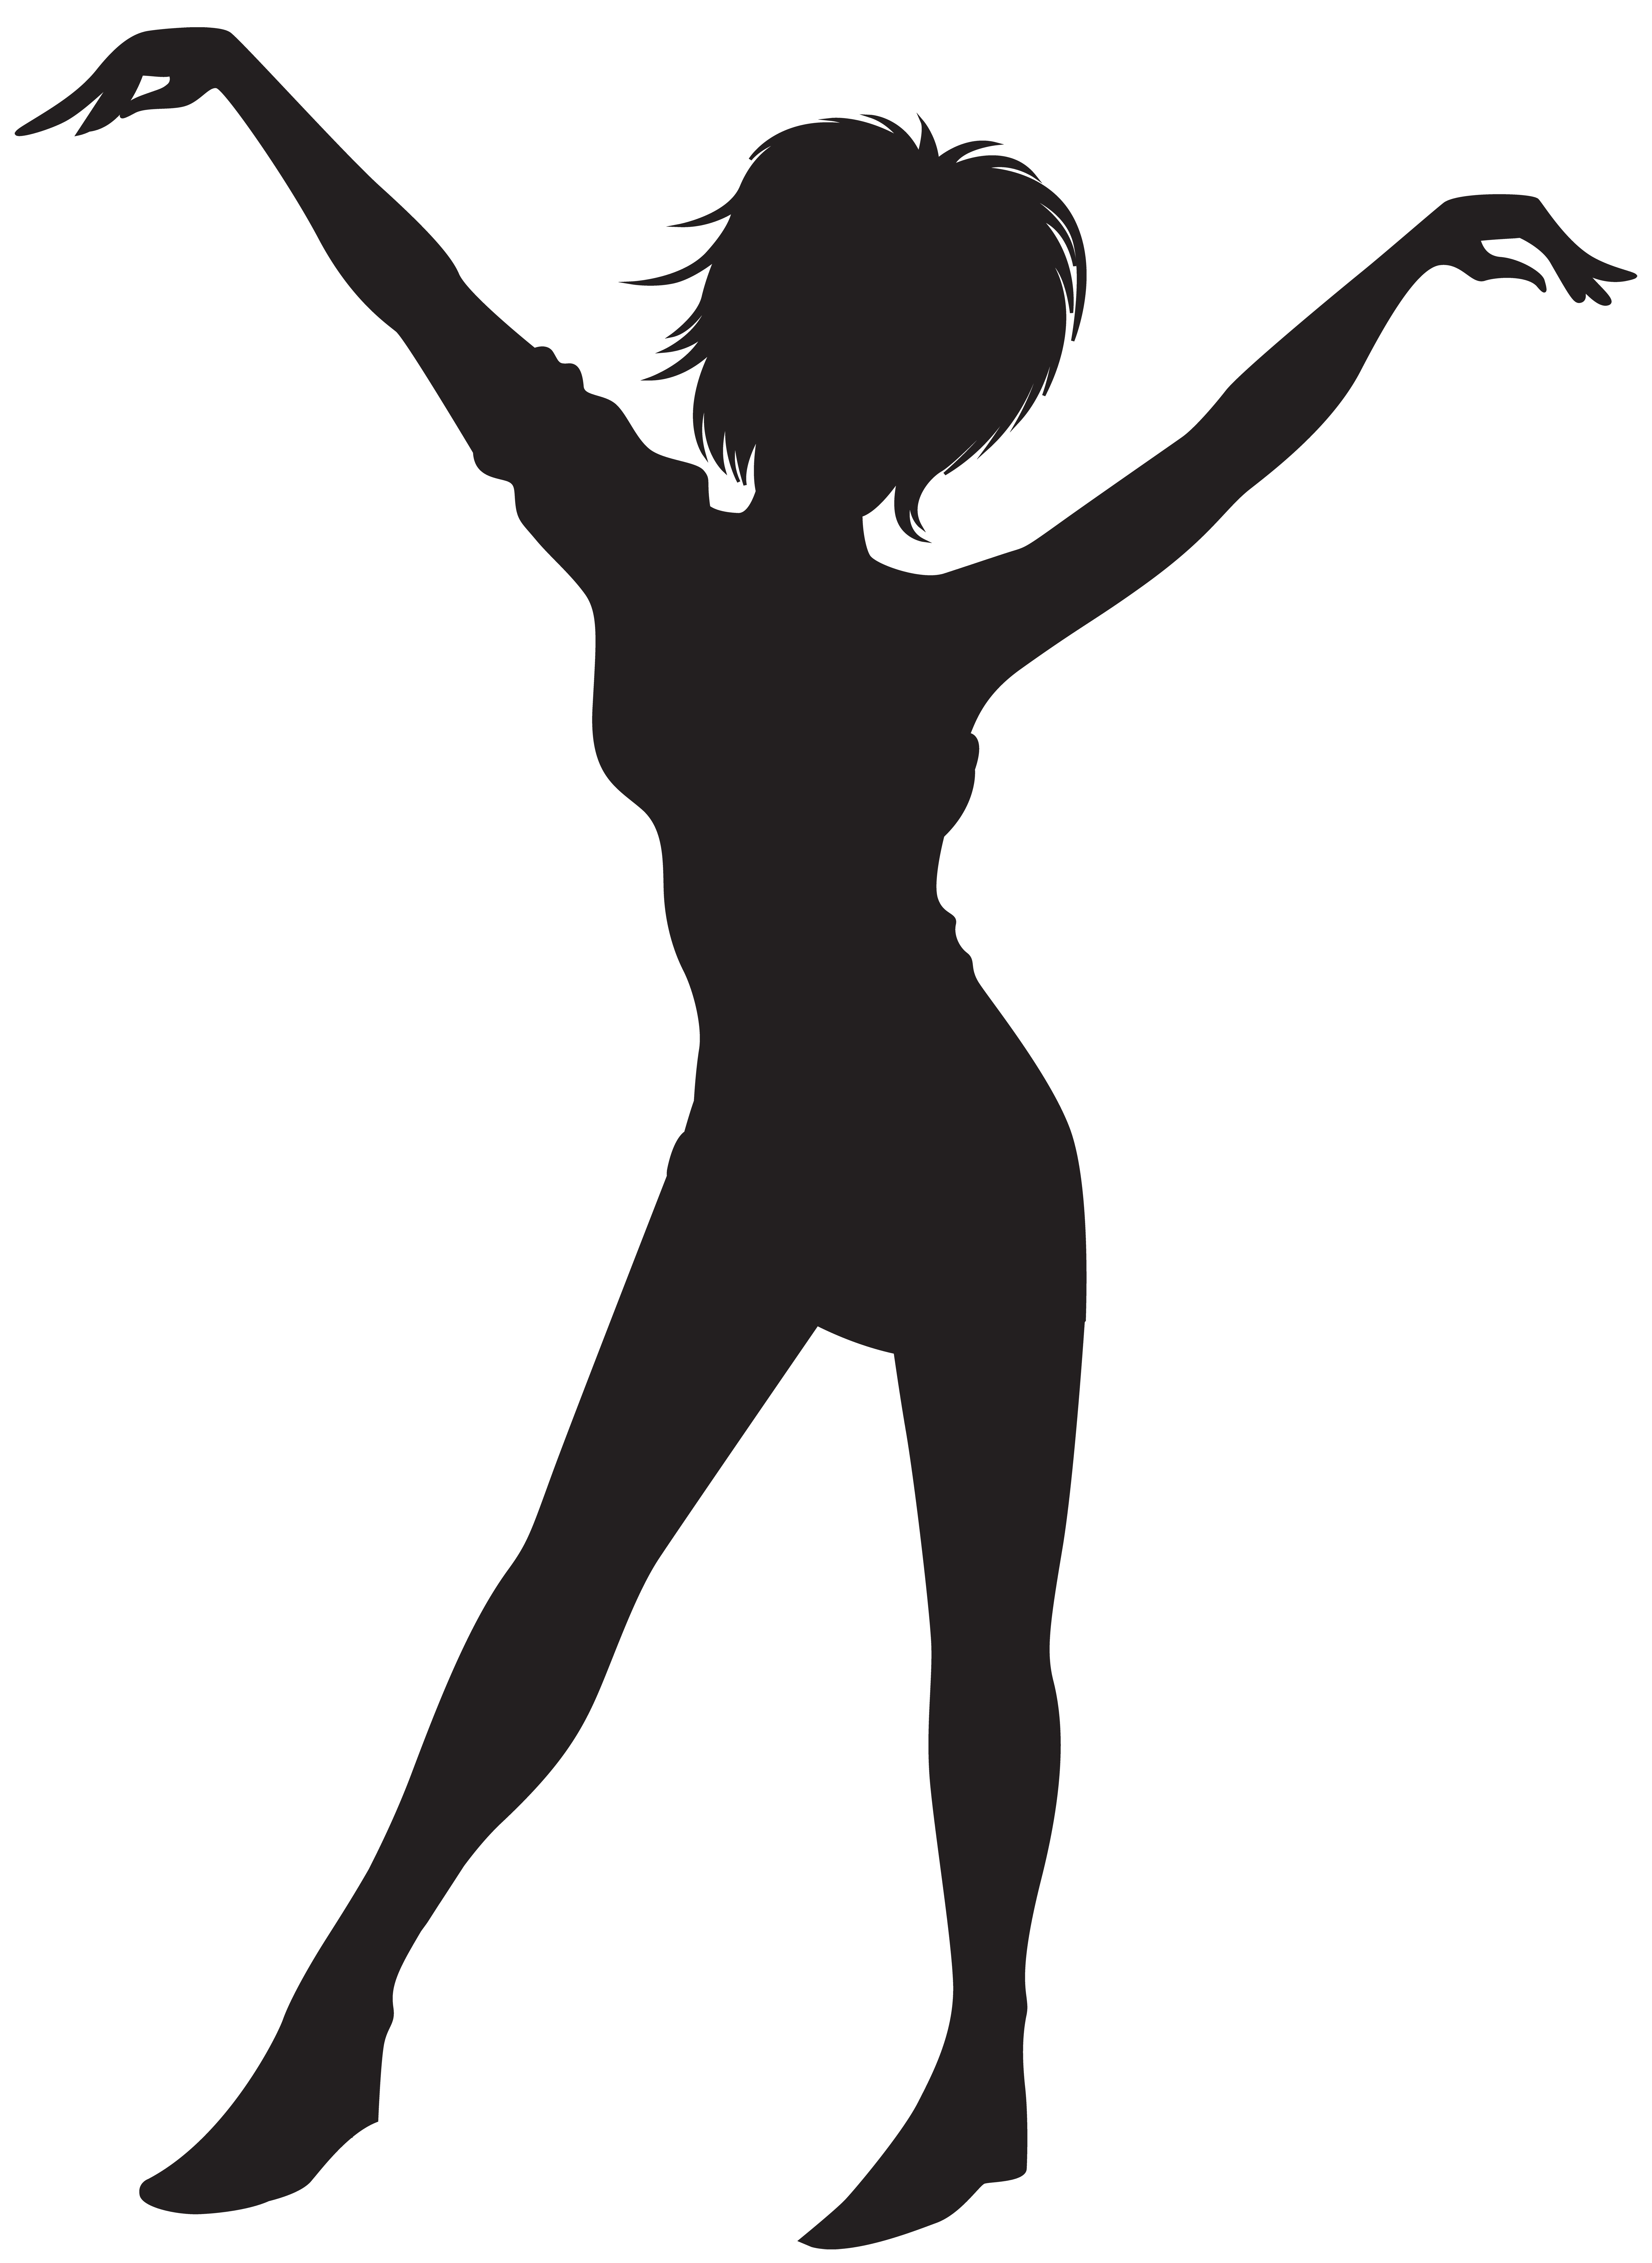 Silhouette Dance Clip art - black woman png download - 5841*8000 - Free ... Dancing With Umbrella Silhouette